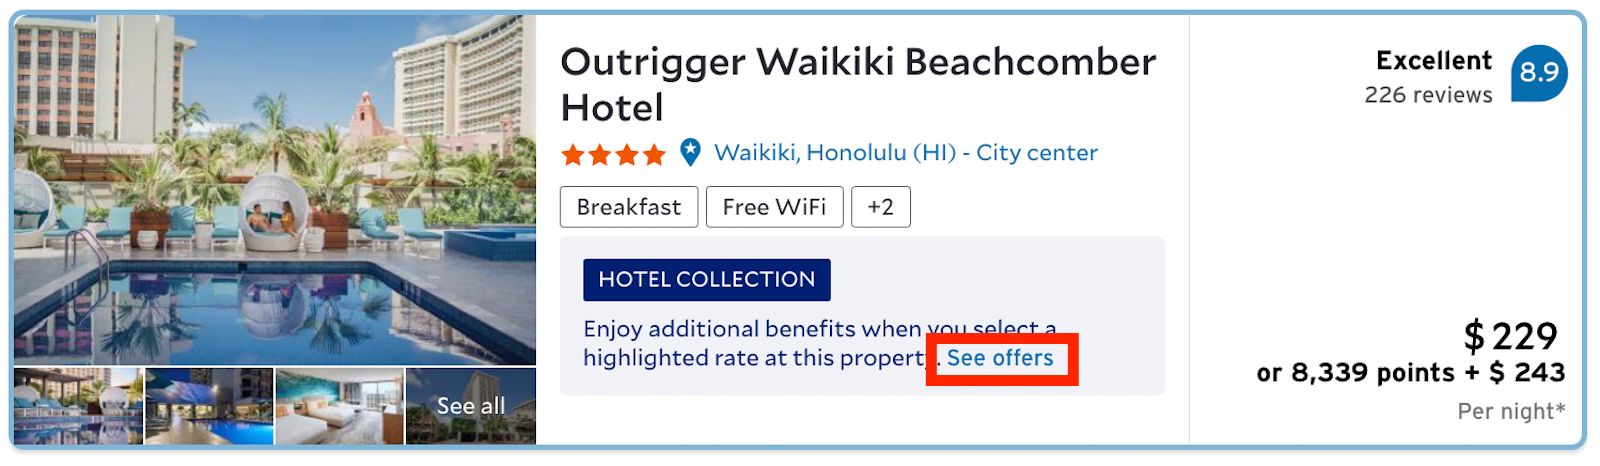 a hotel in Waikiki flagged as part of Citi's Hotel Collection with extra benefits